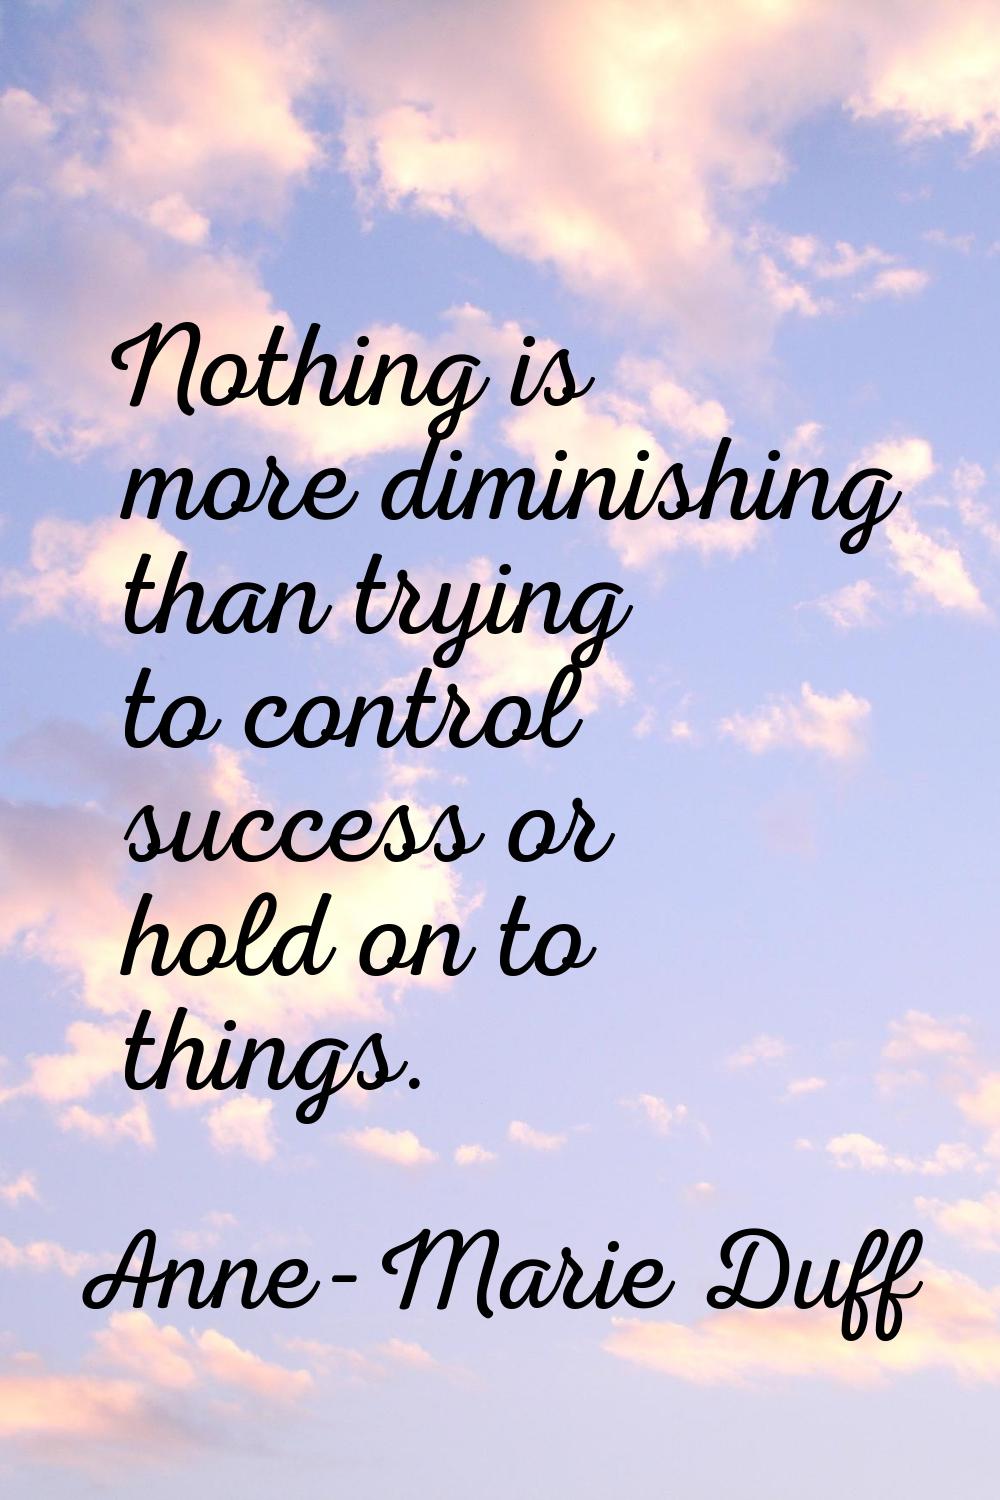 Nothing is more diminishing than trying to control success or hold on to things.